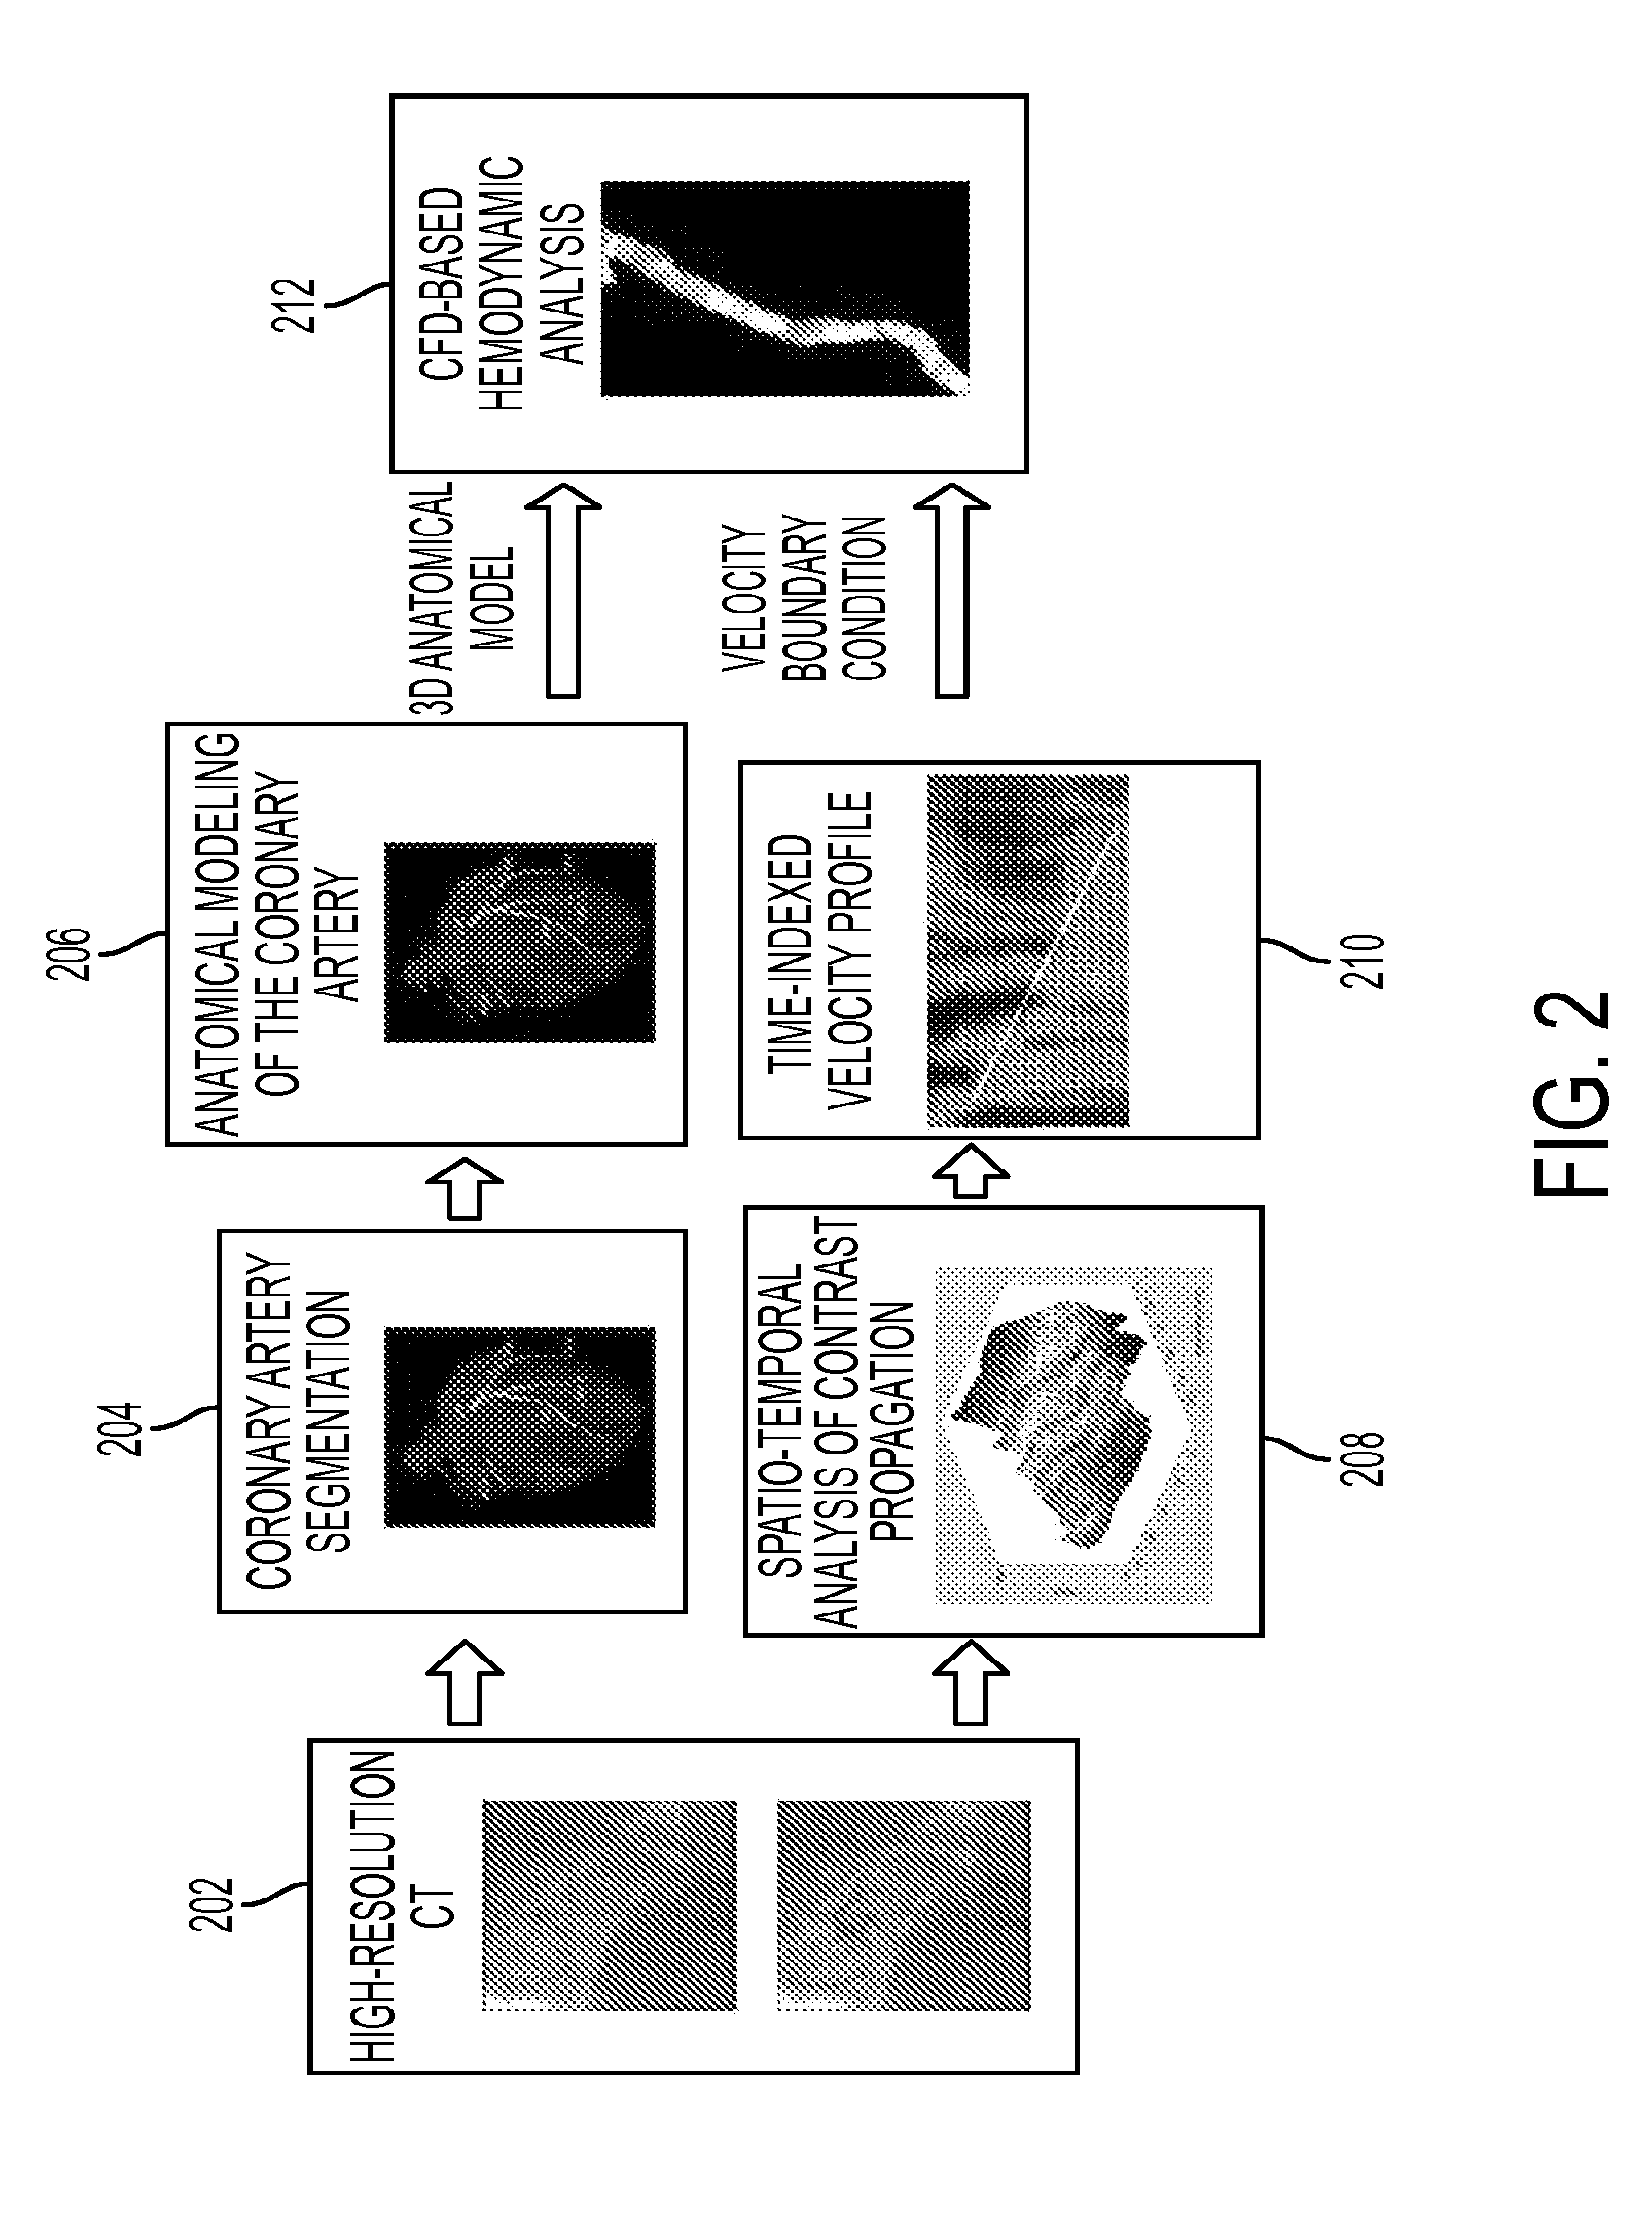 Method and System for Non-Invasive Assessment of Coronary Artery Disease